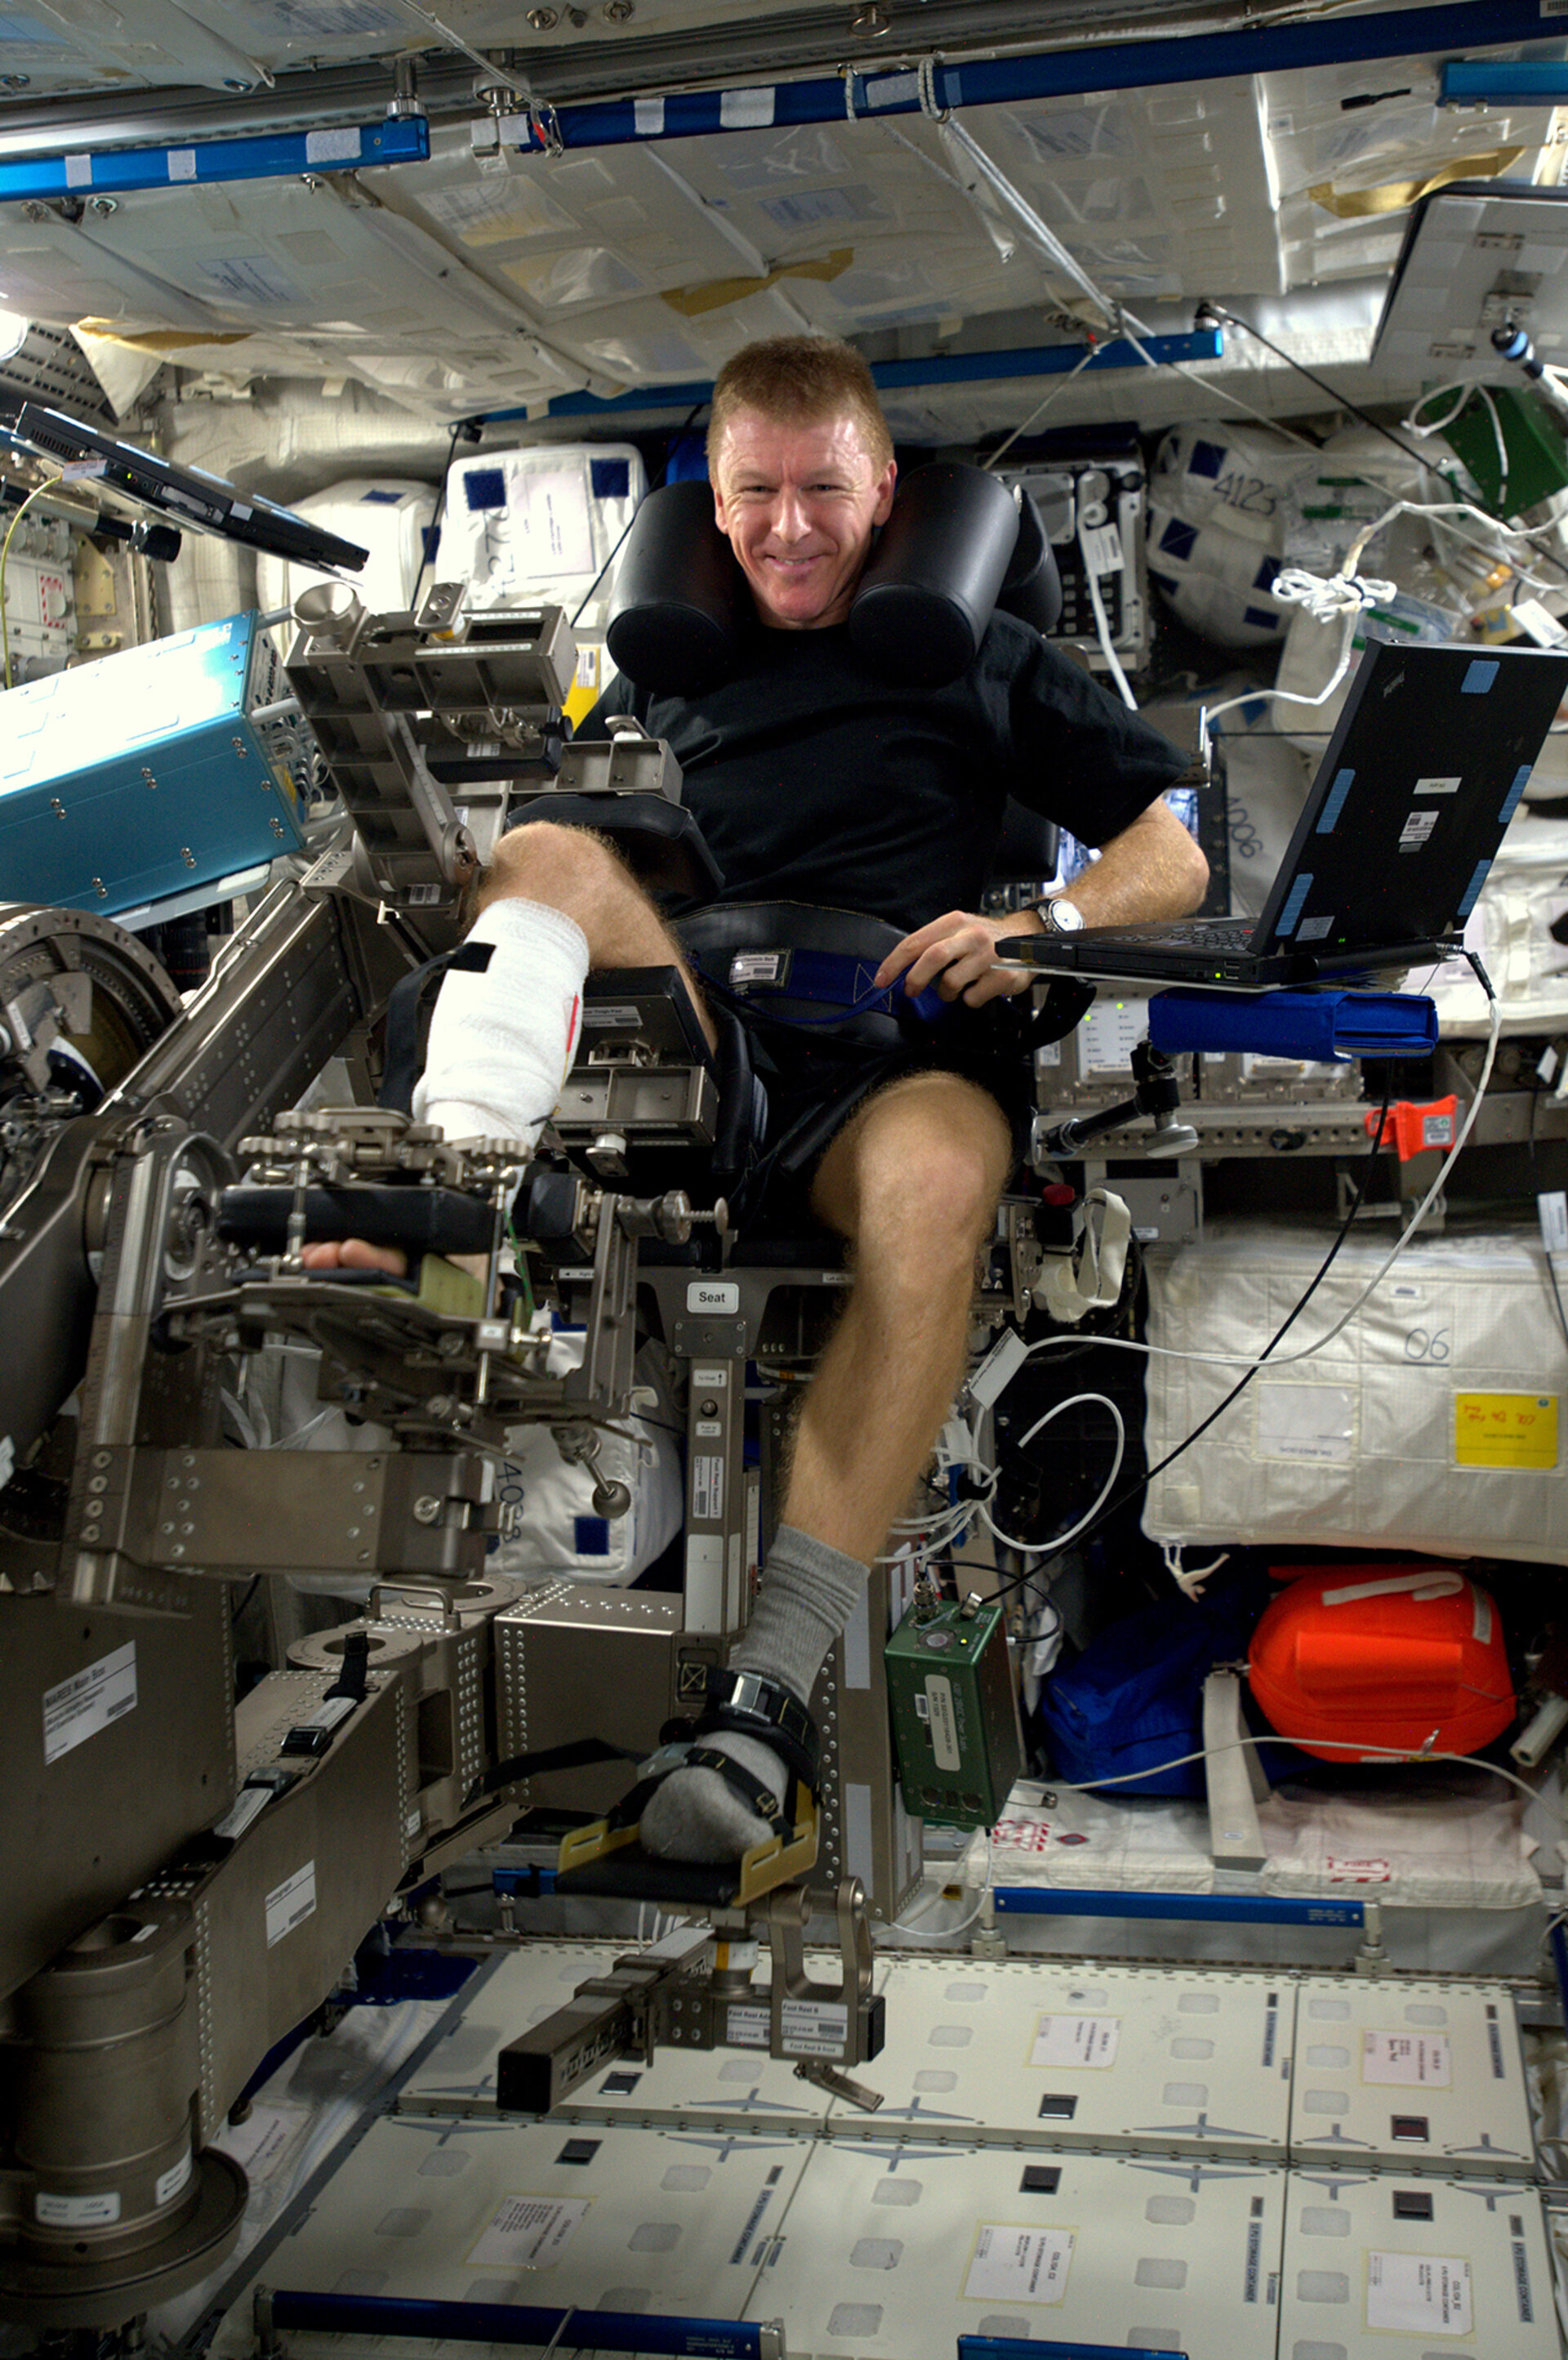 Tim Peake using Mares on the ISS